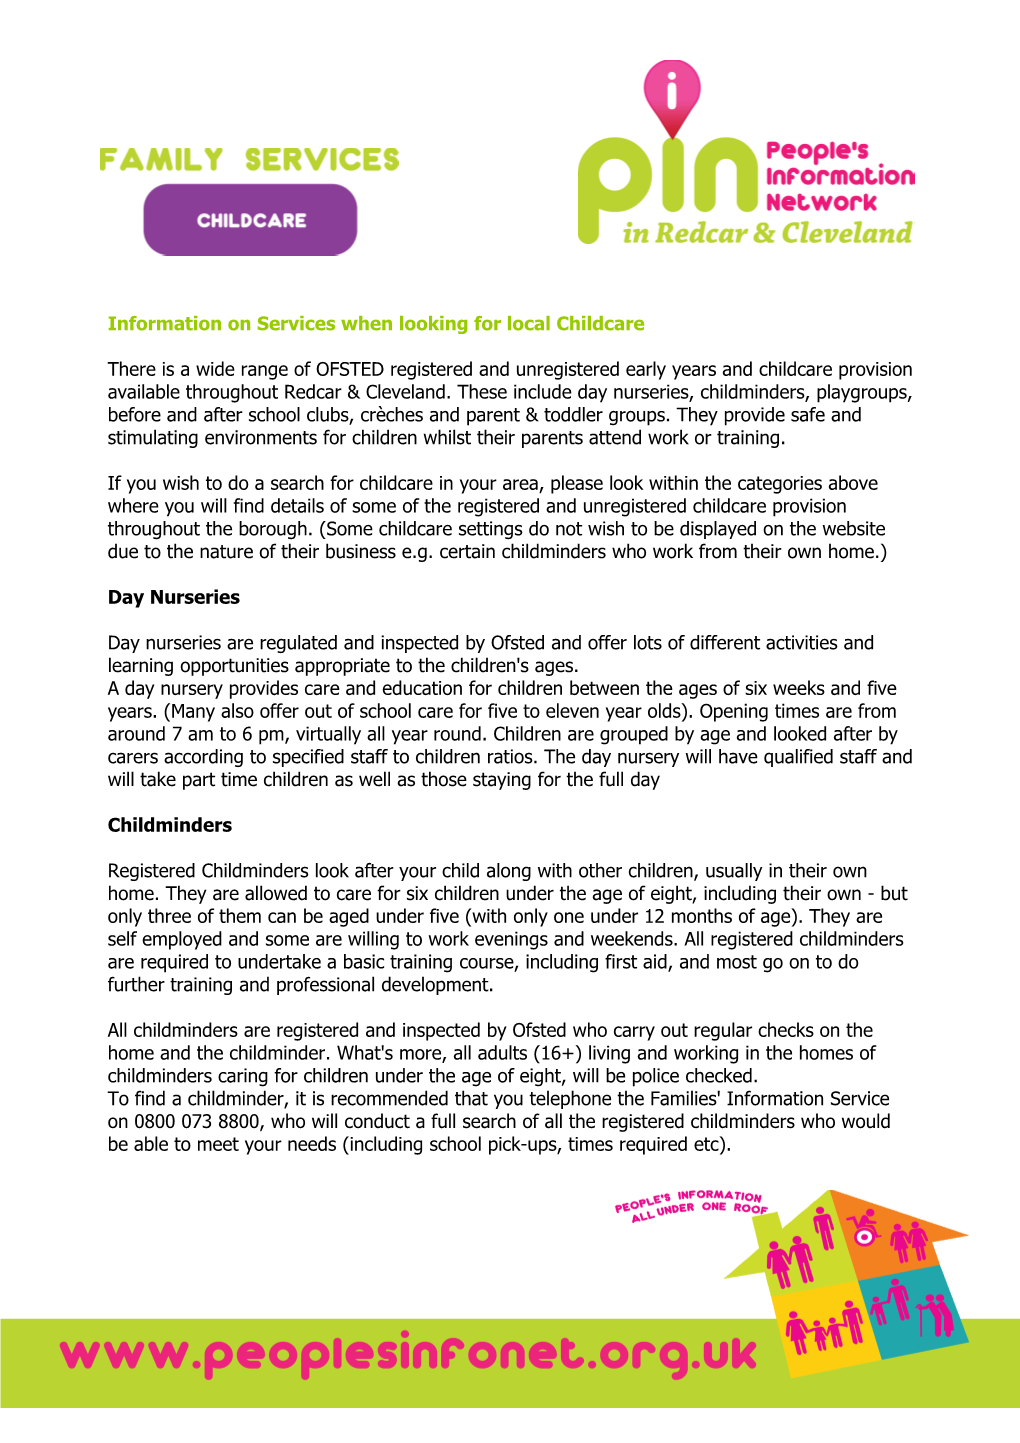 Information on Services When Looking for Local Childcare